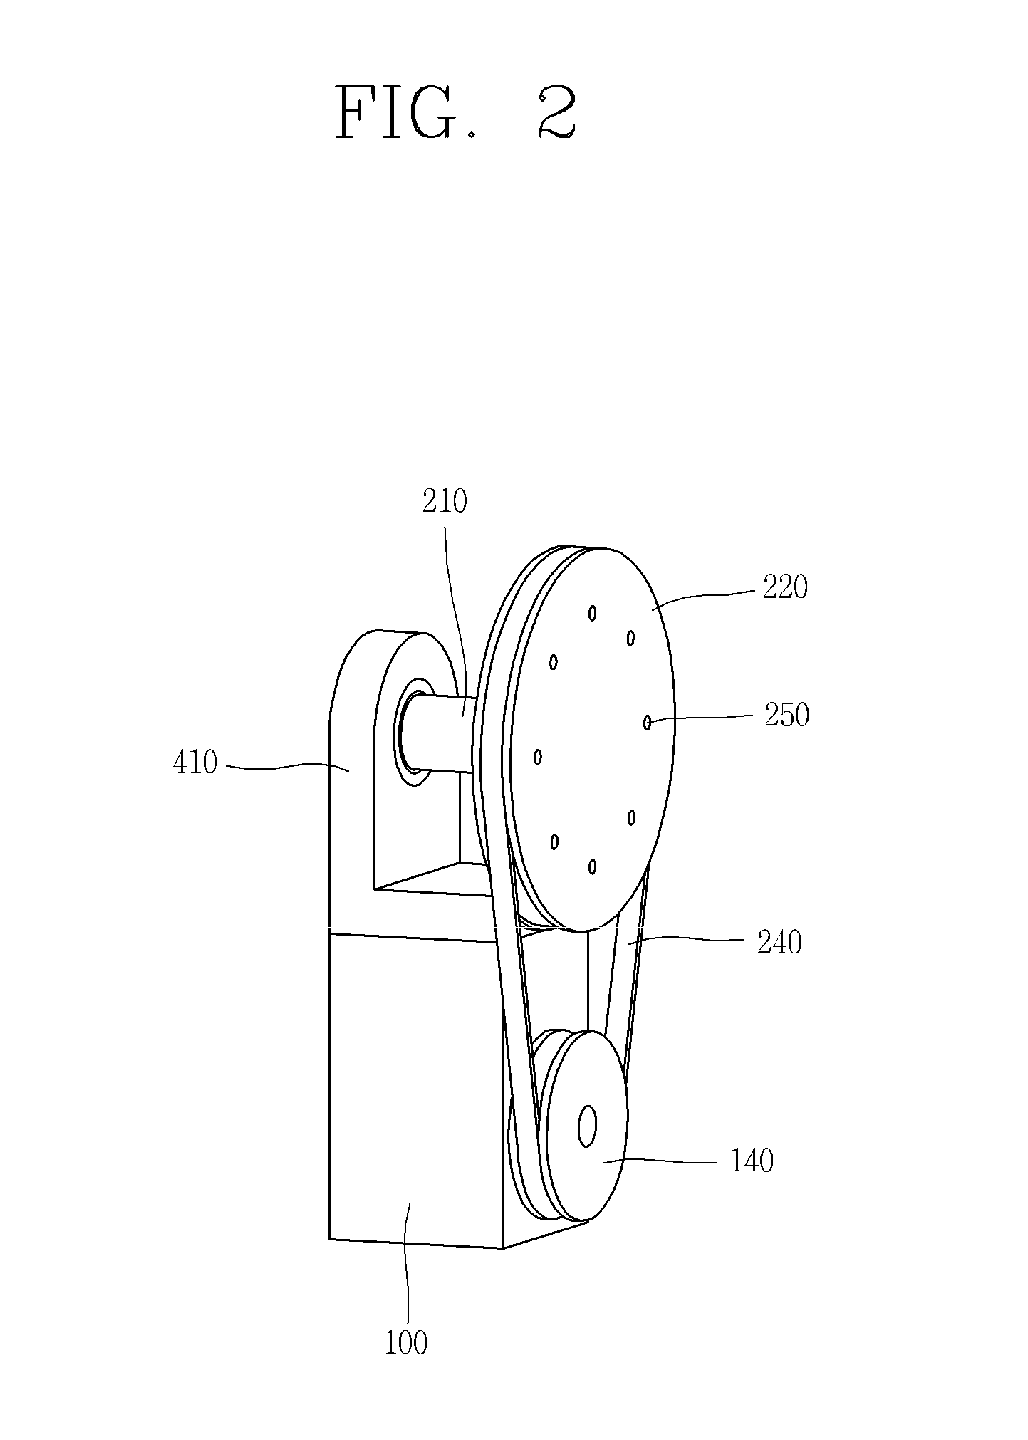 Actuator module applicable to various forms of joint